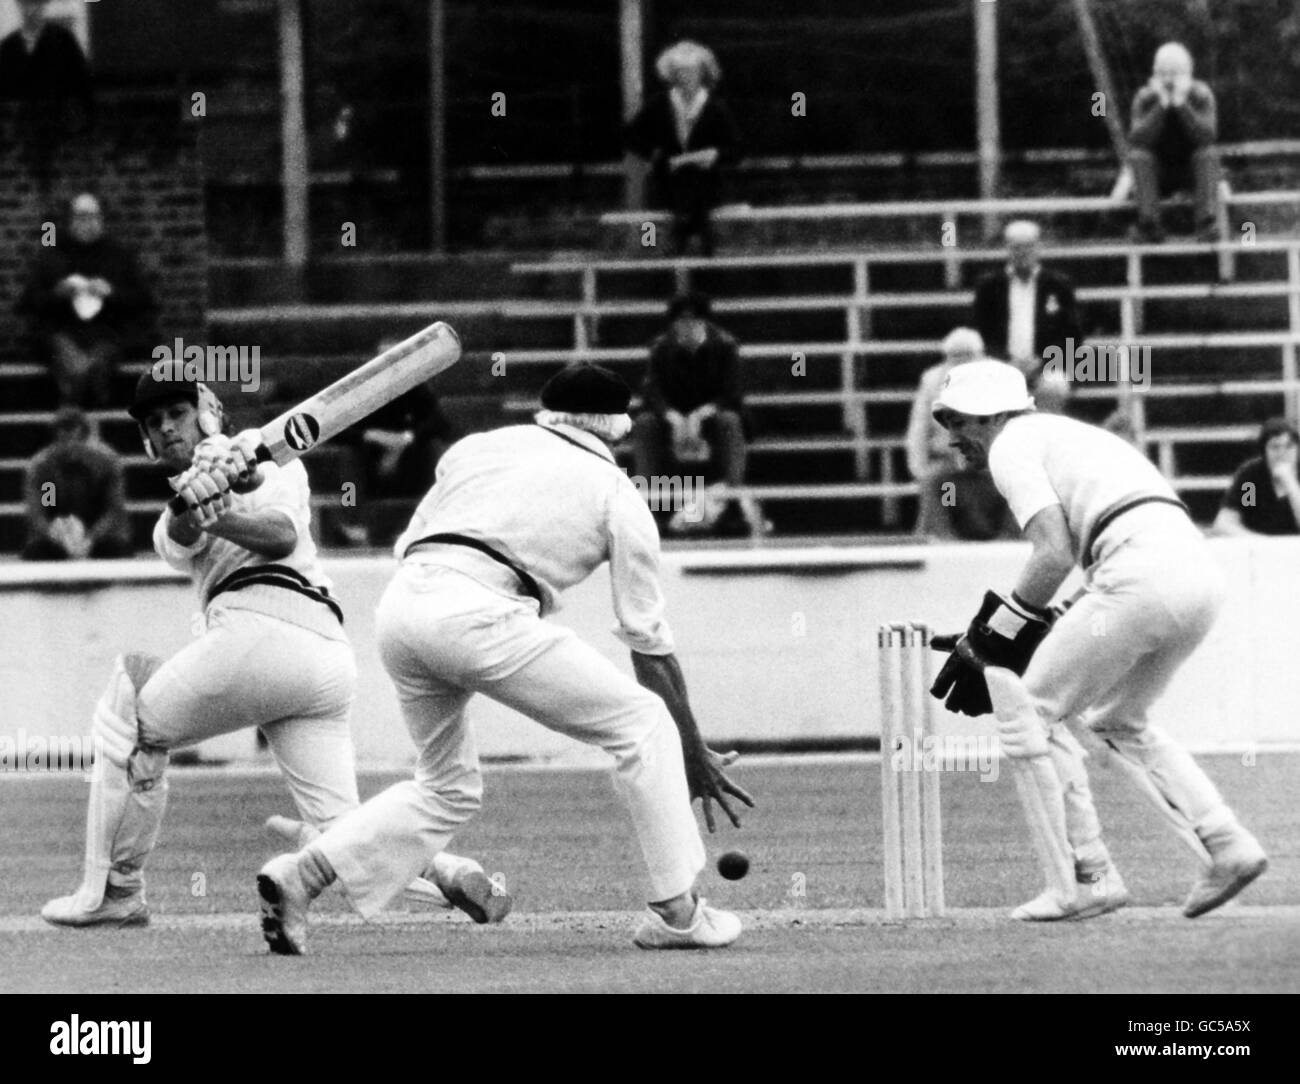 Surrey's Clifton James Richards pushes the ball past the out stretched hand of Derbyshire's David Stanley Steele whilst the Derbyshire wicketkeeper Robert William Taylor looks on Stock Photo